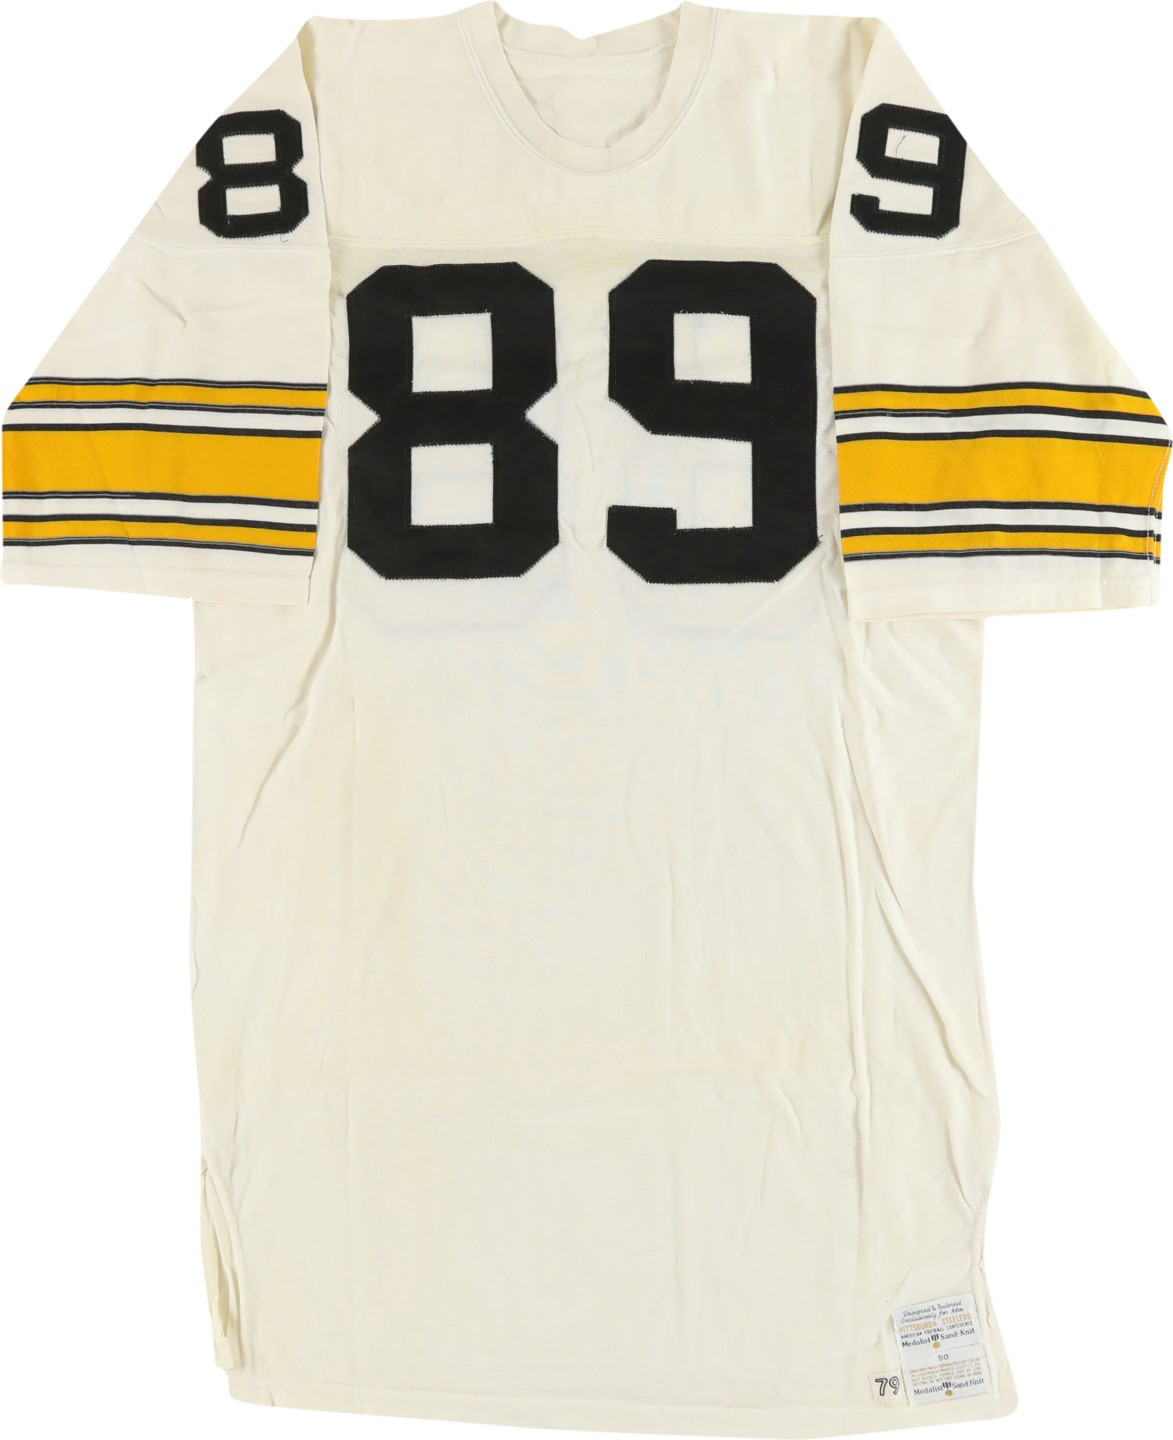 The Pittsburgh Steelers Game Worn Jersey Archive - 1979 Bennie Cunningham Pittsburgh Steelers Game Worn Jersey